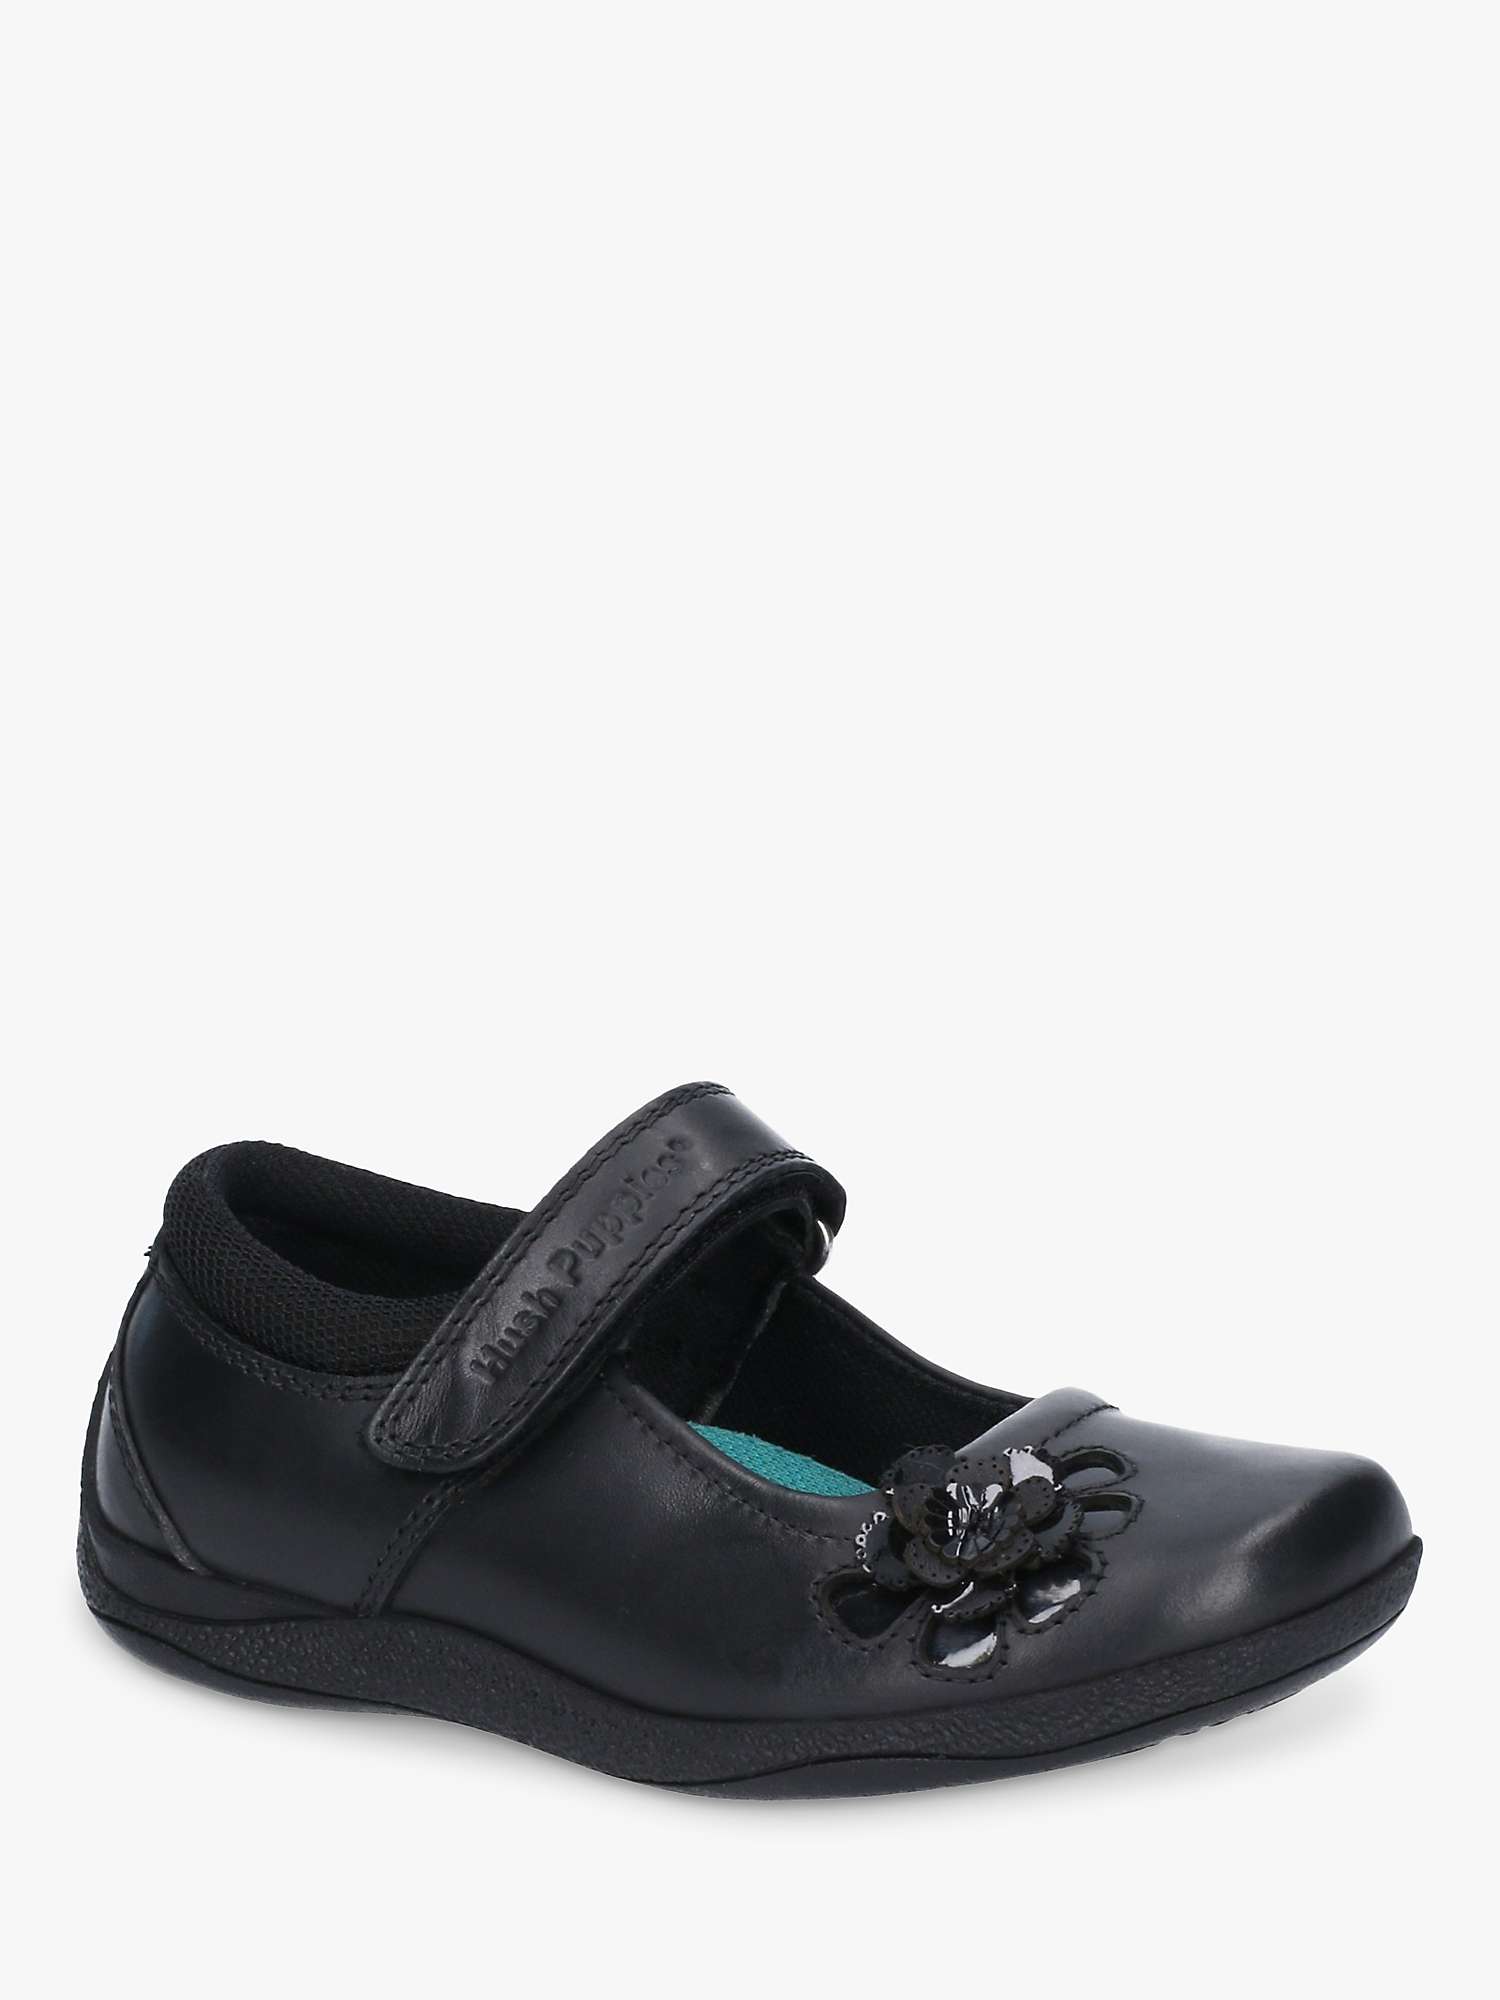 Buy Hush Puppies Kids' Jessica Senior Leather Mary Jane Shoes, Black Online at johnlewis.com